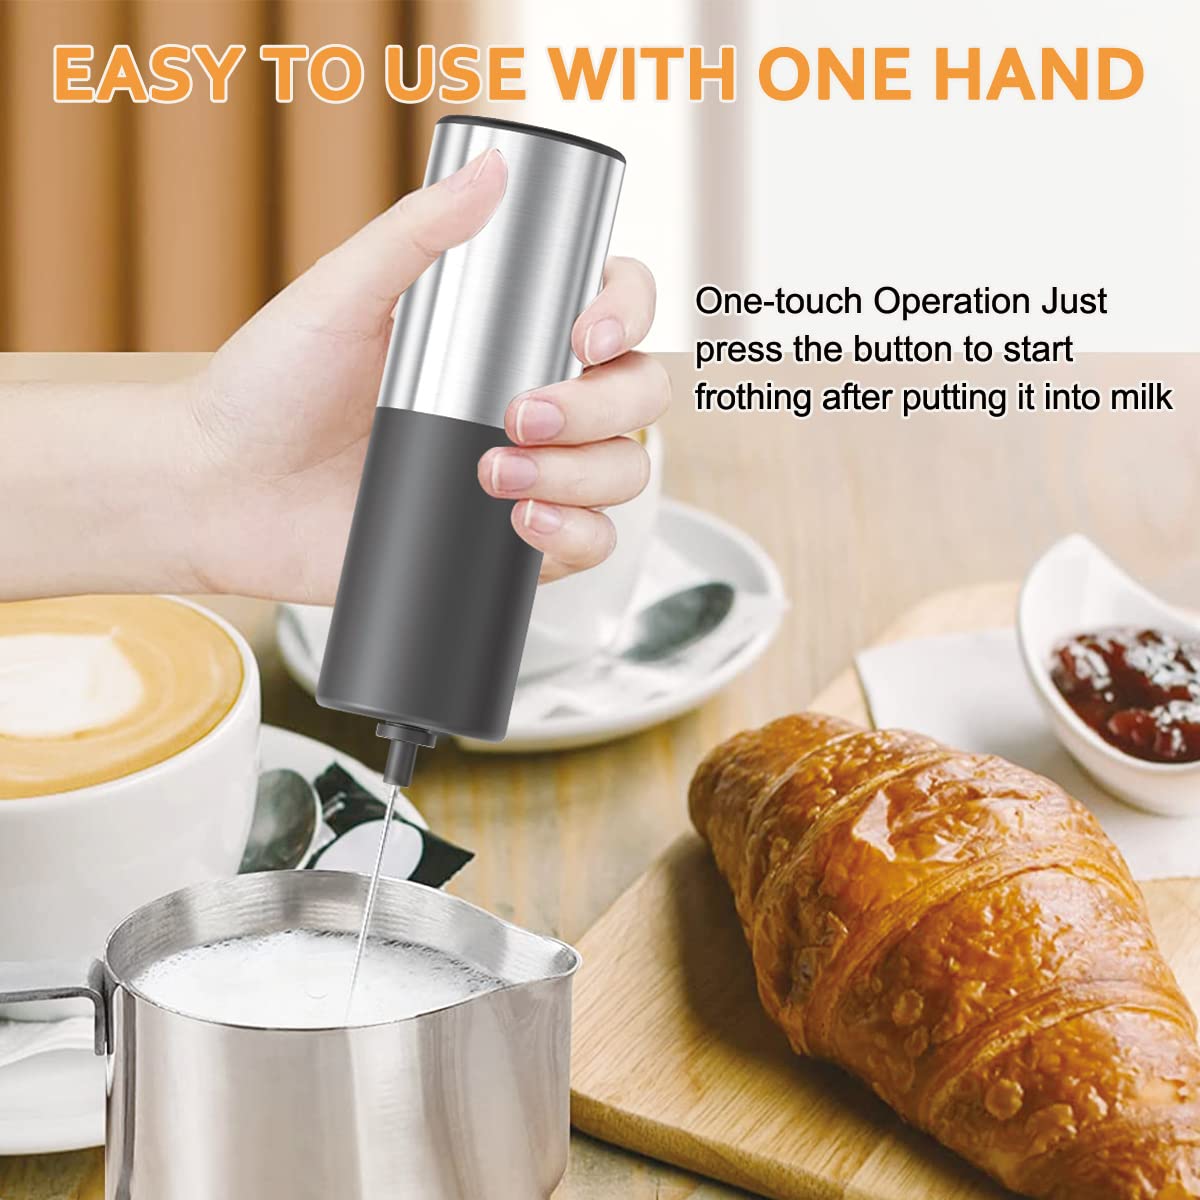 1Pcs Electric Milk Frother with Egg Beater Whisk, Foam Maker with